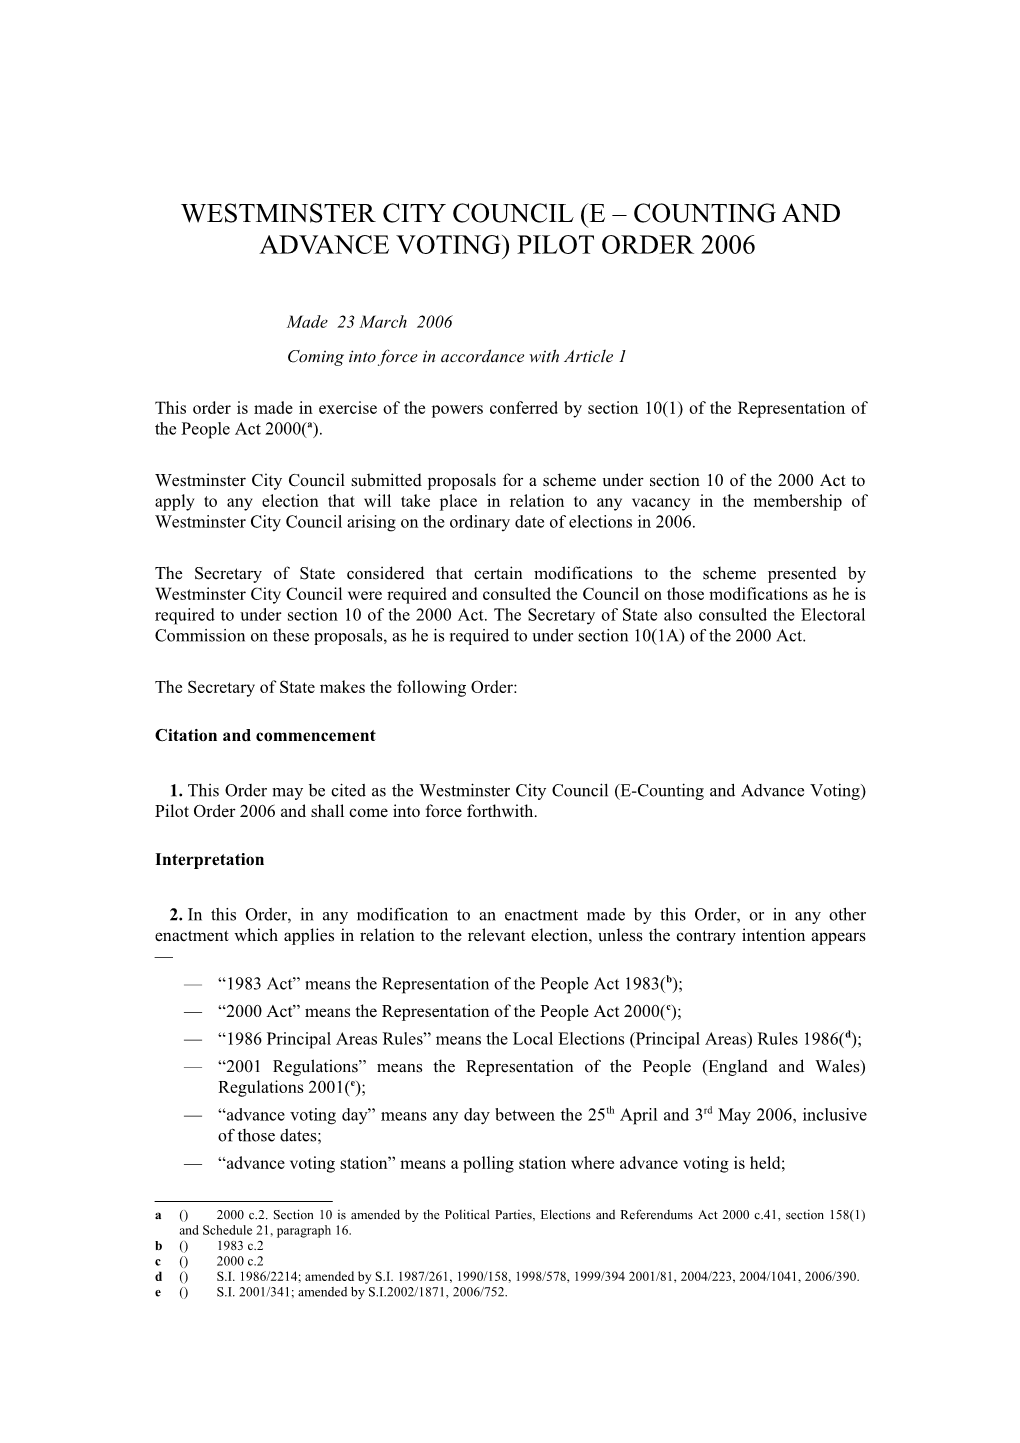 Westminster City Council (E Counting and Advance Voting) Pilot Order 2006